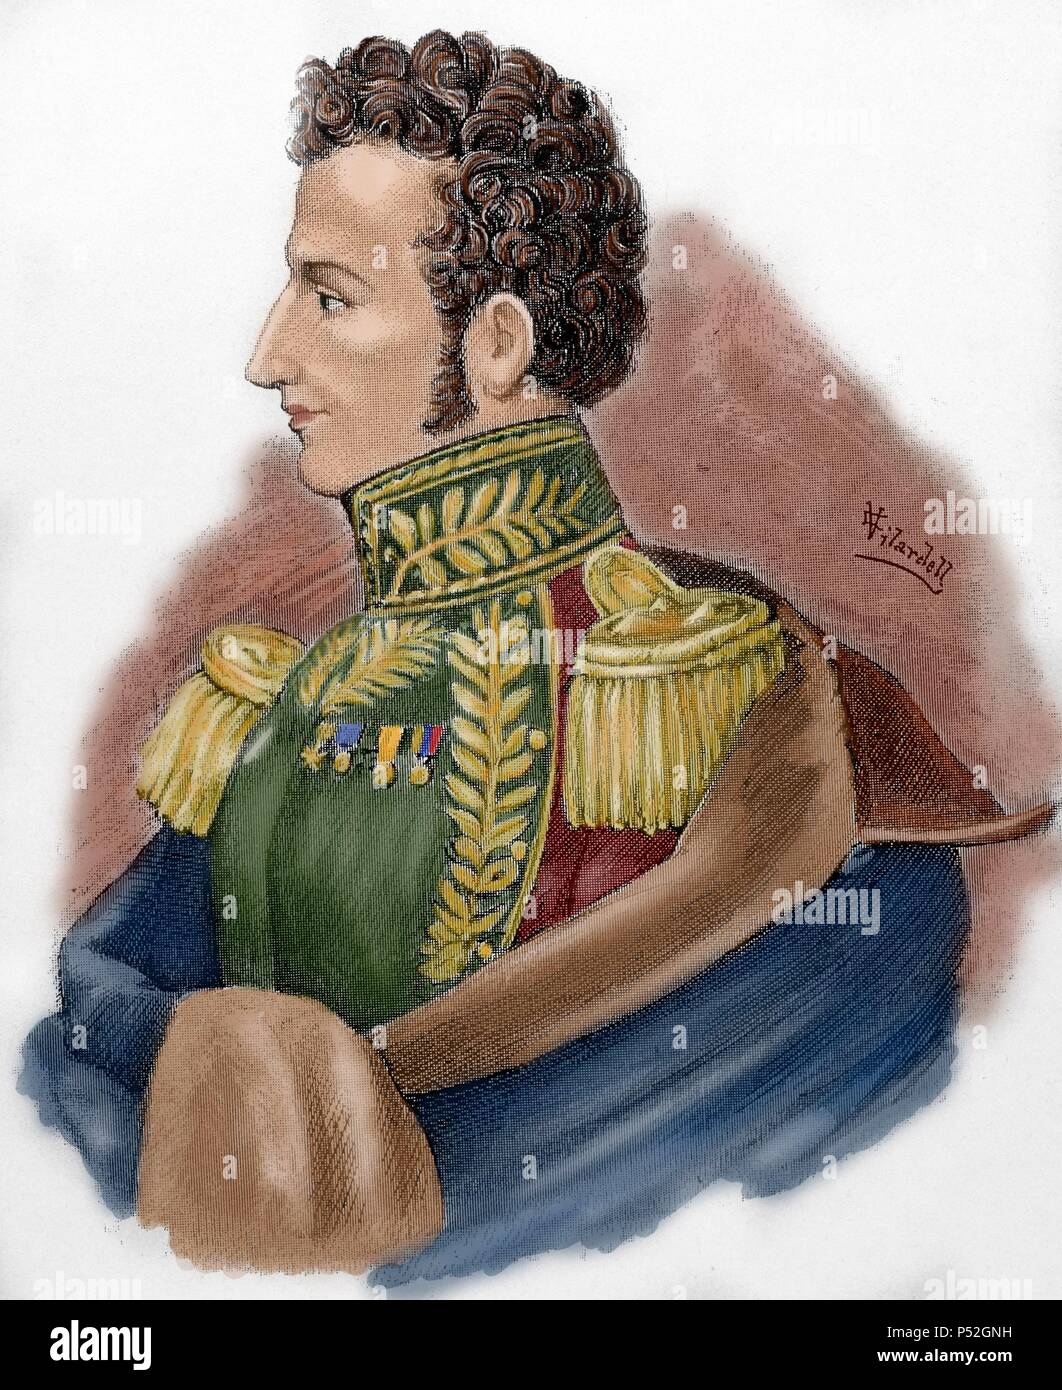 Antonio Jose de Sucre (1795-1830), known as the Grand Marshal of Ayacucho. Venezuelan independence leader, general and statesman. Colored engraving, 1888. Stock Photo